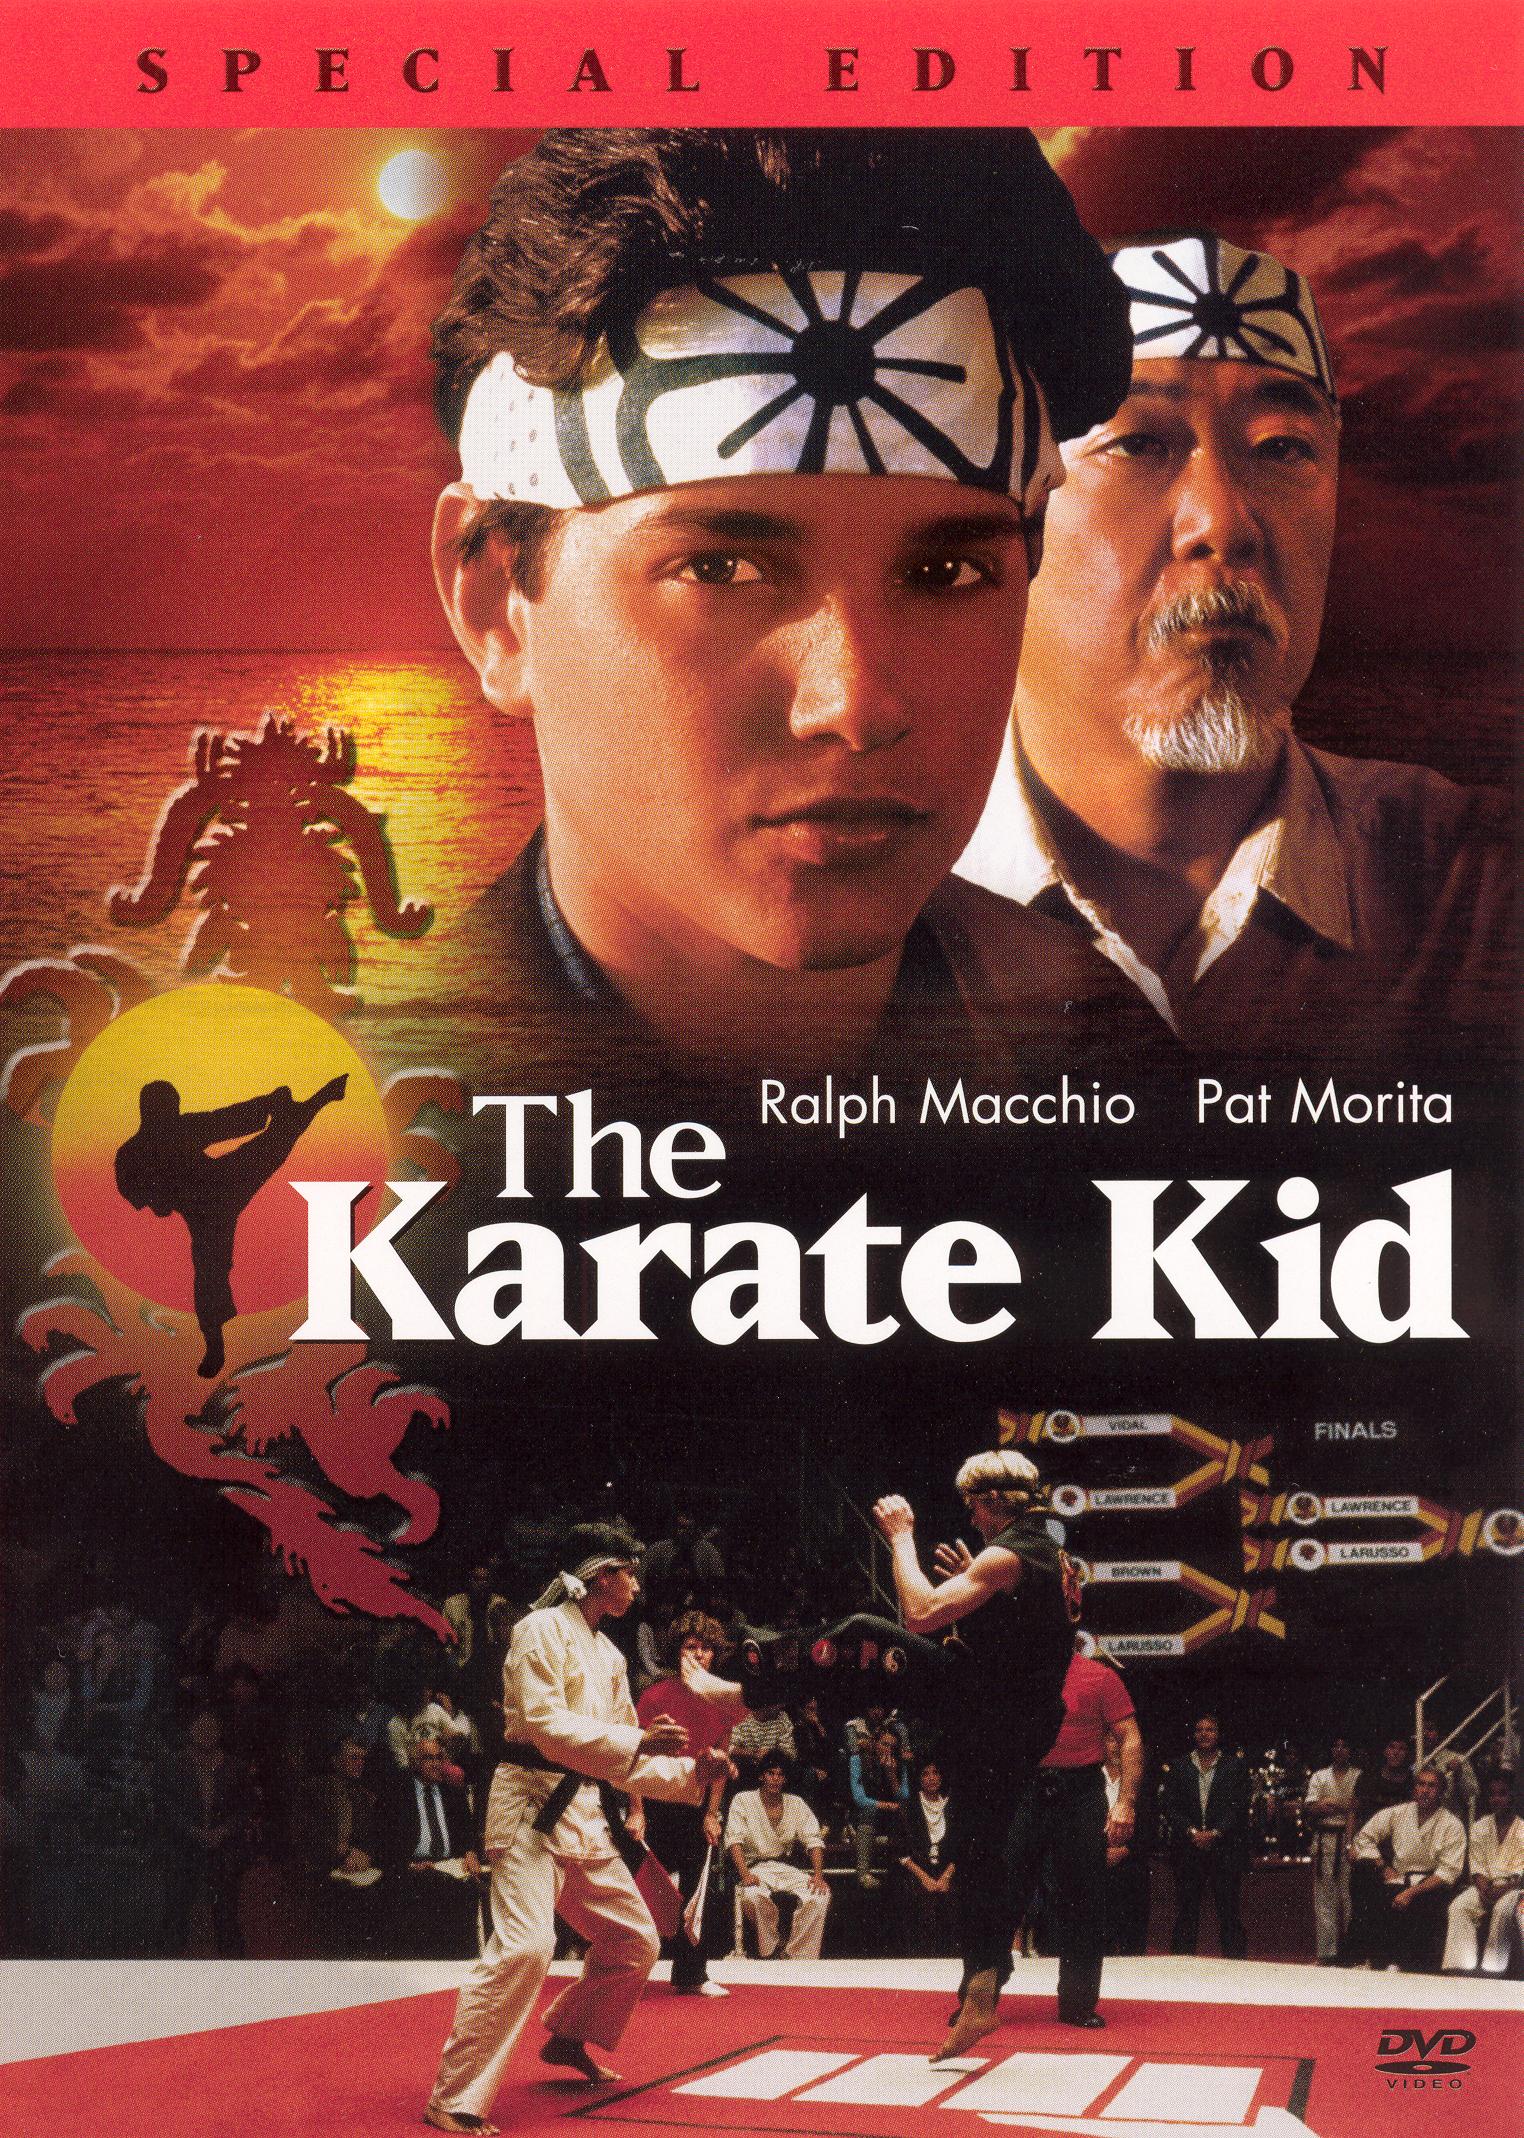 The Karate Kid [Special Edition] [DVD] [1984] - Best Buy